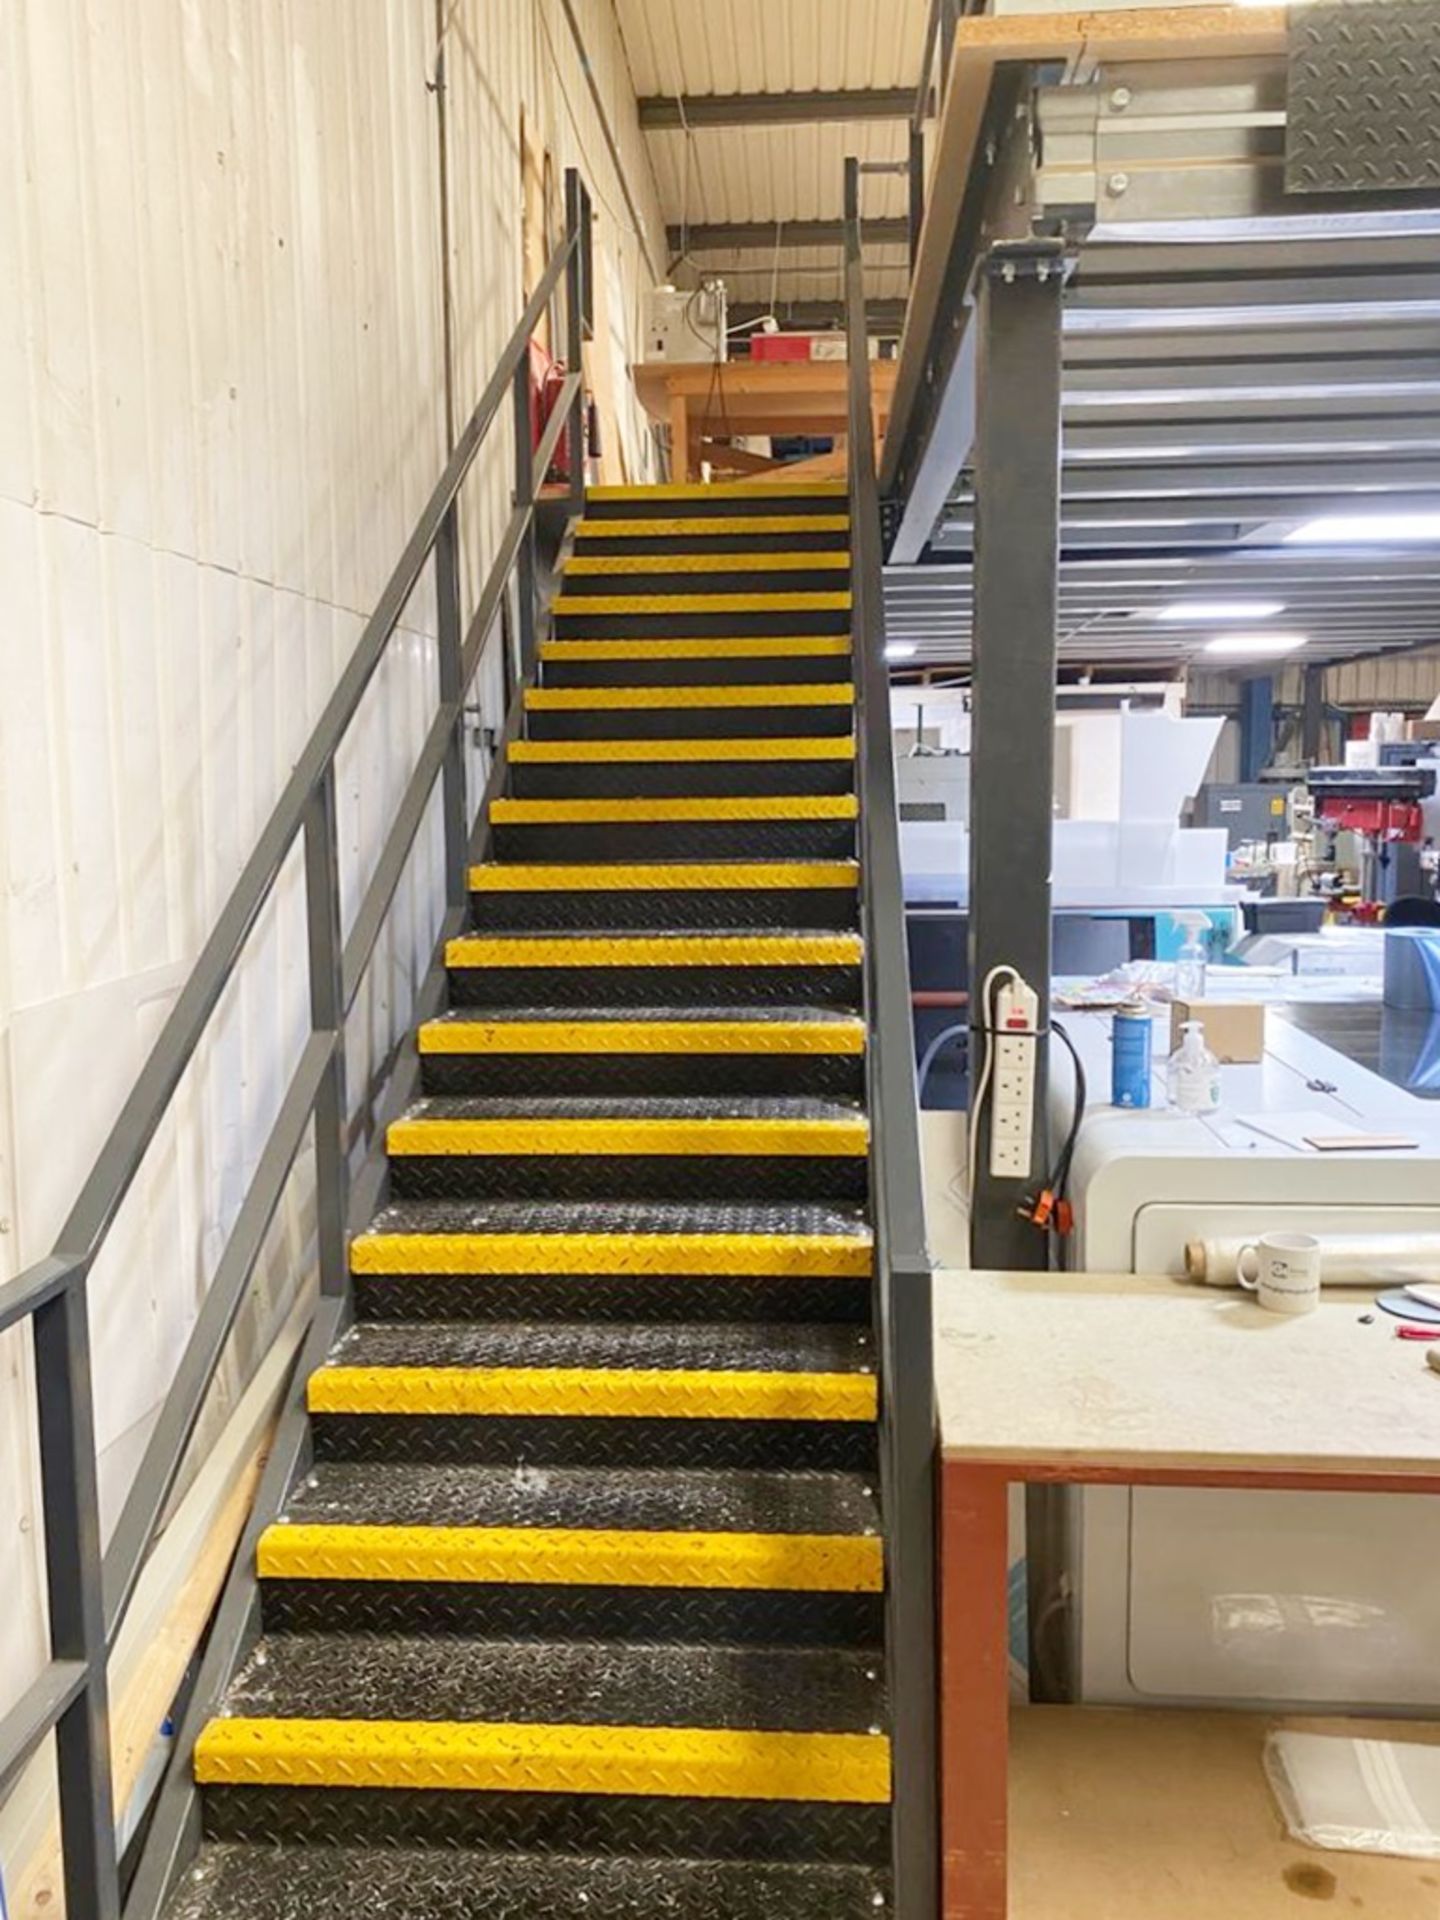 1 x Warehouse Mezzanine Floor - Includes Stairs, Guard Rails, Lighting and a Pallet Gate - Image 2 of 16